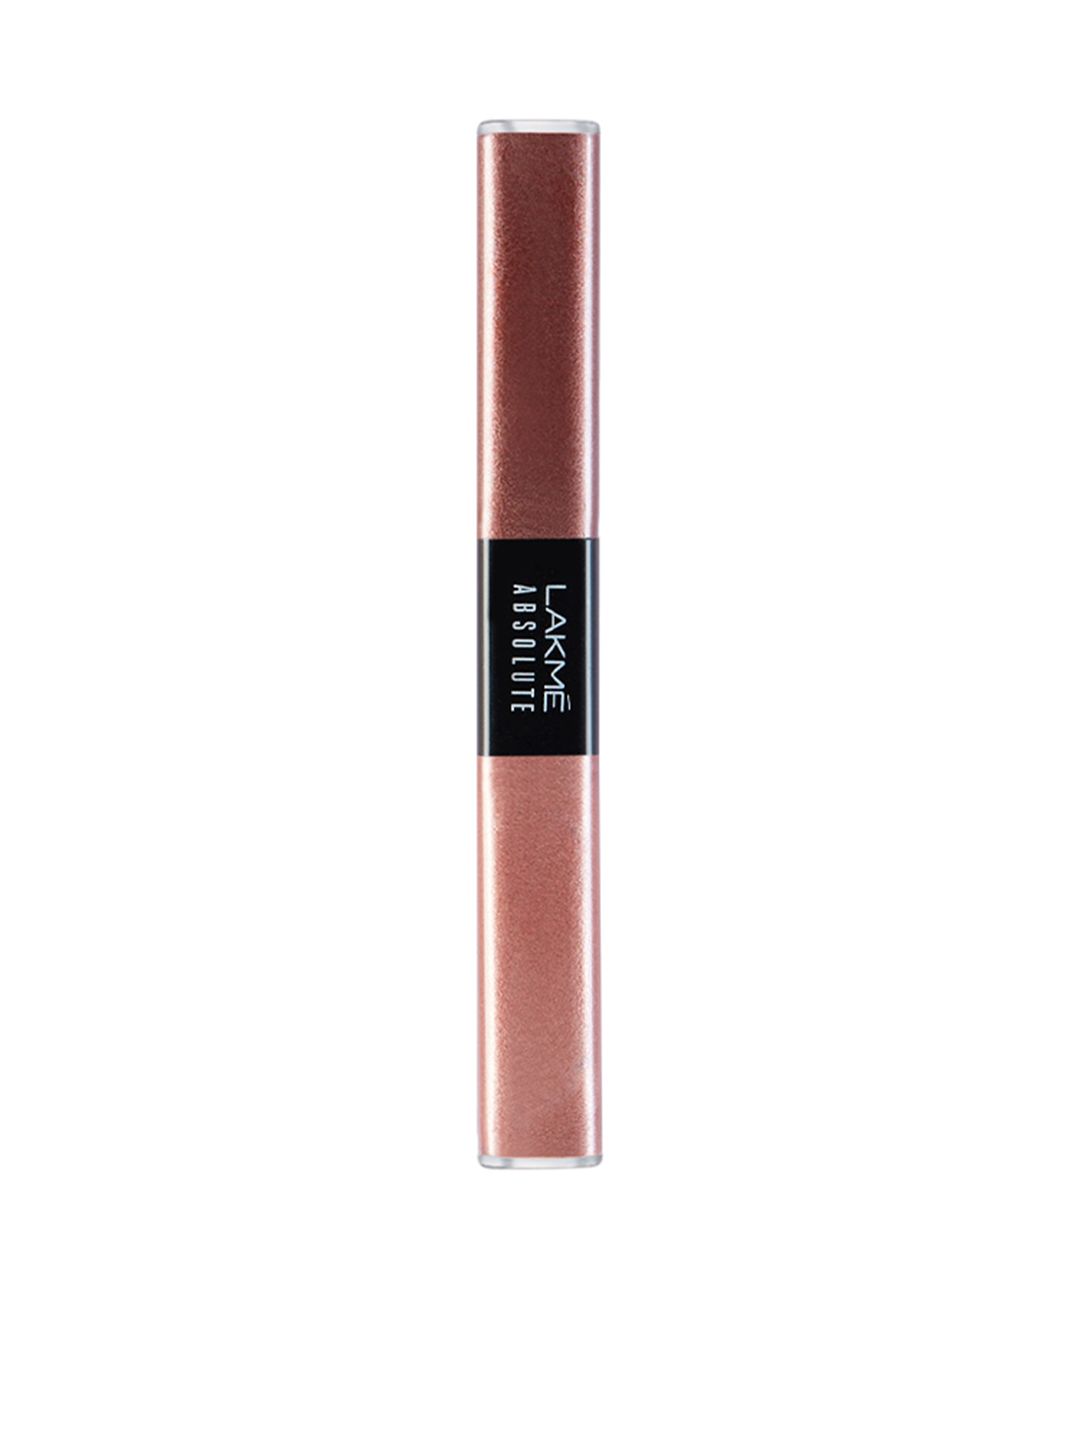 Lakme Absolute Explore Liquid Eyeshadow Duos 10ml - Pink Champagne & Copper Glitter Price in India